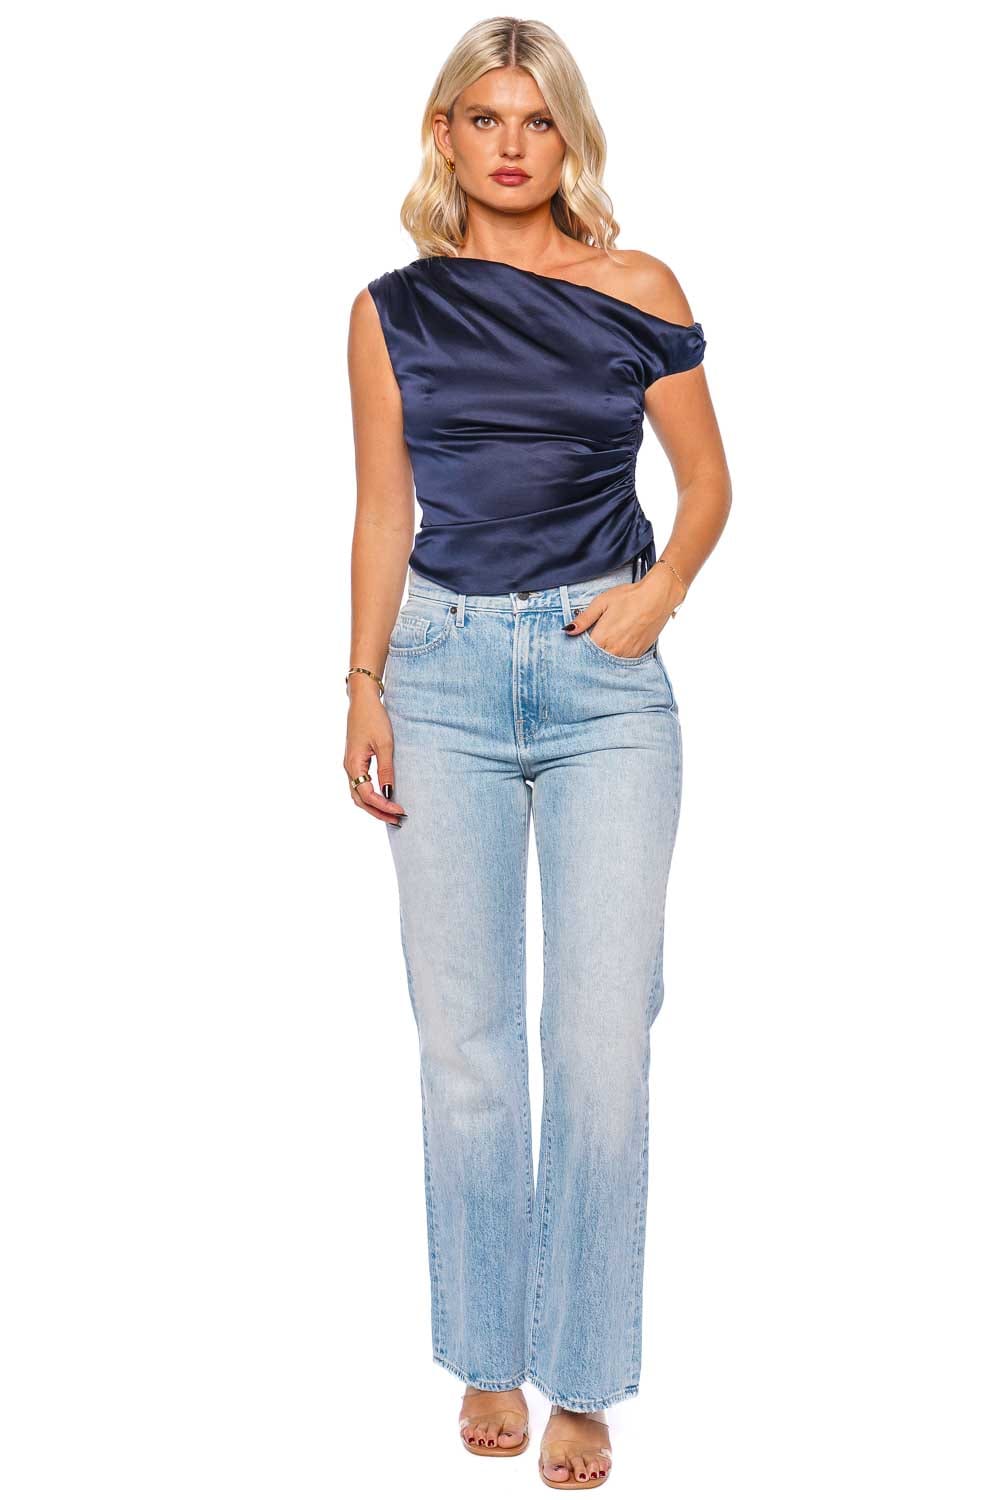 Veronica Beard Dione One Shoulder Ruched Top